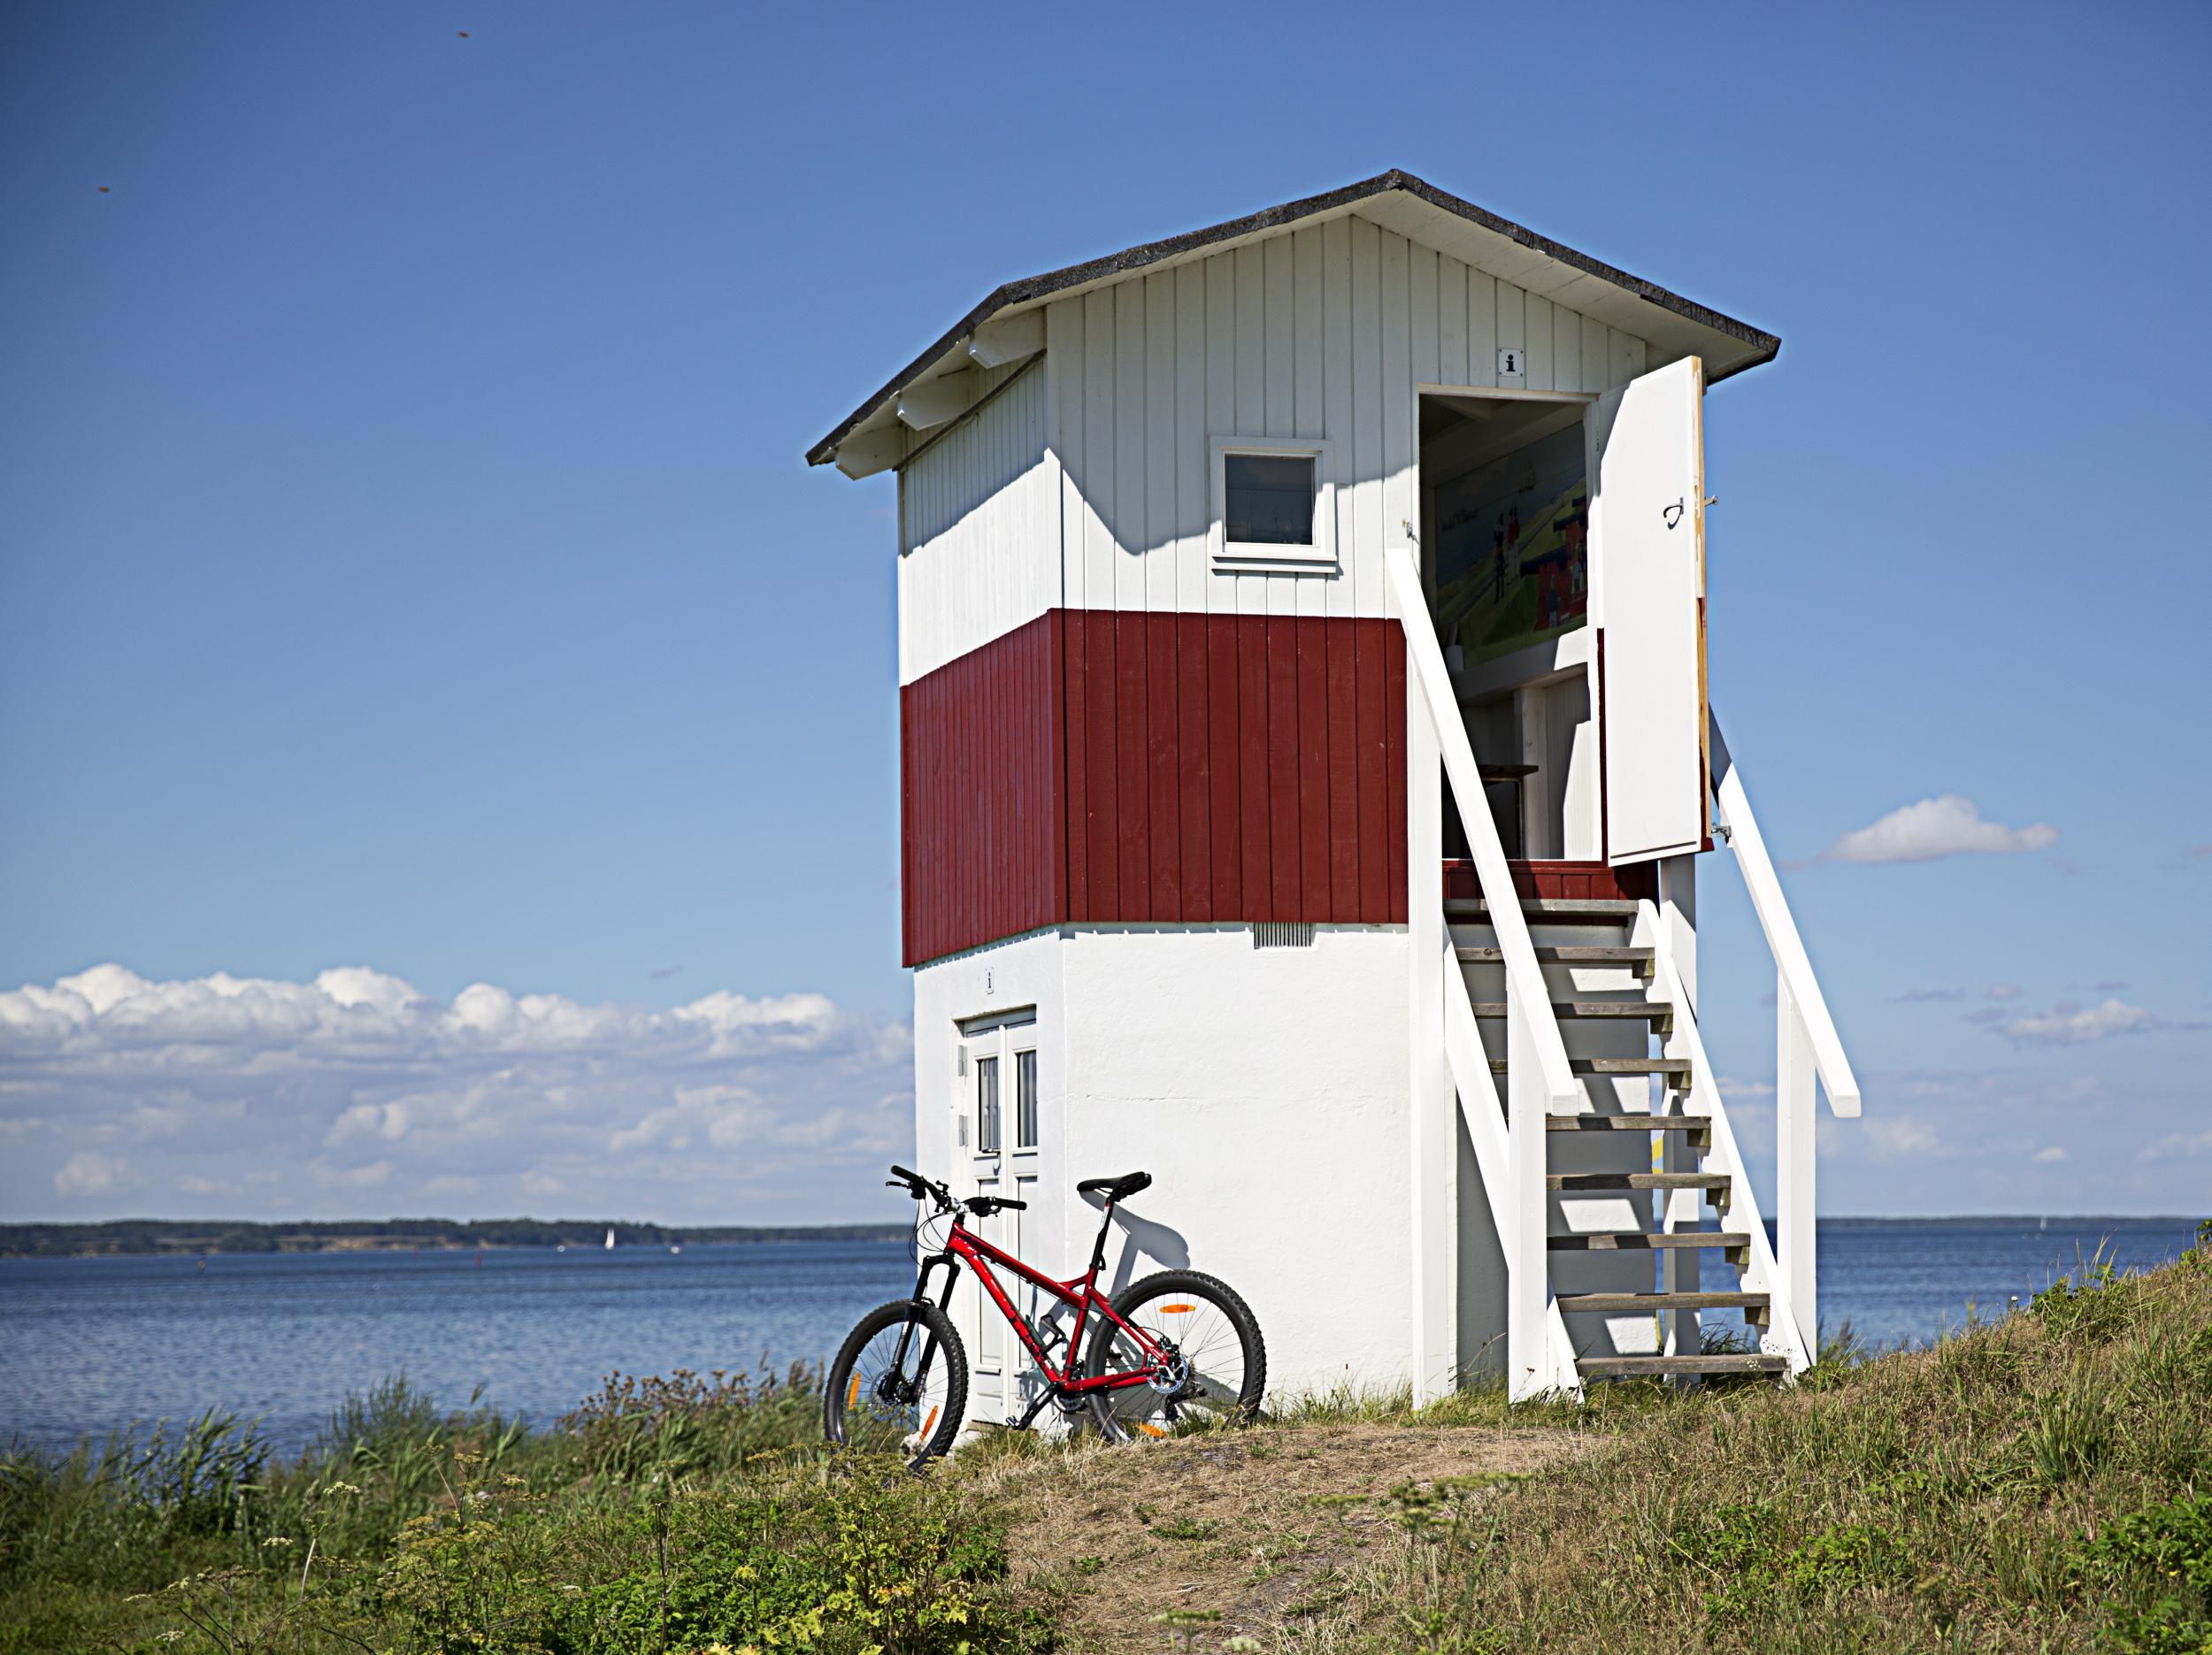 Try a self-guided cycling holiday on the Danish island of Zealand, home to Copenhagen and Roskilde